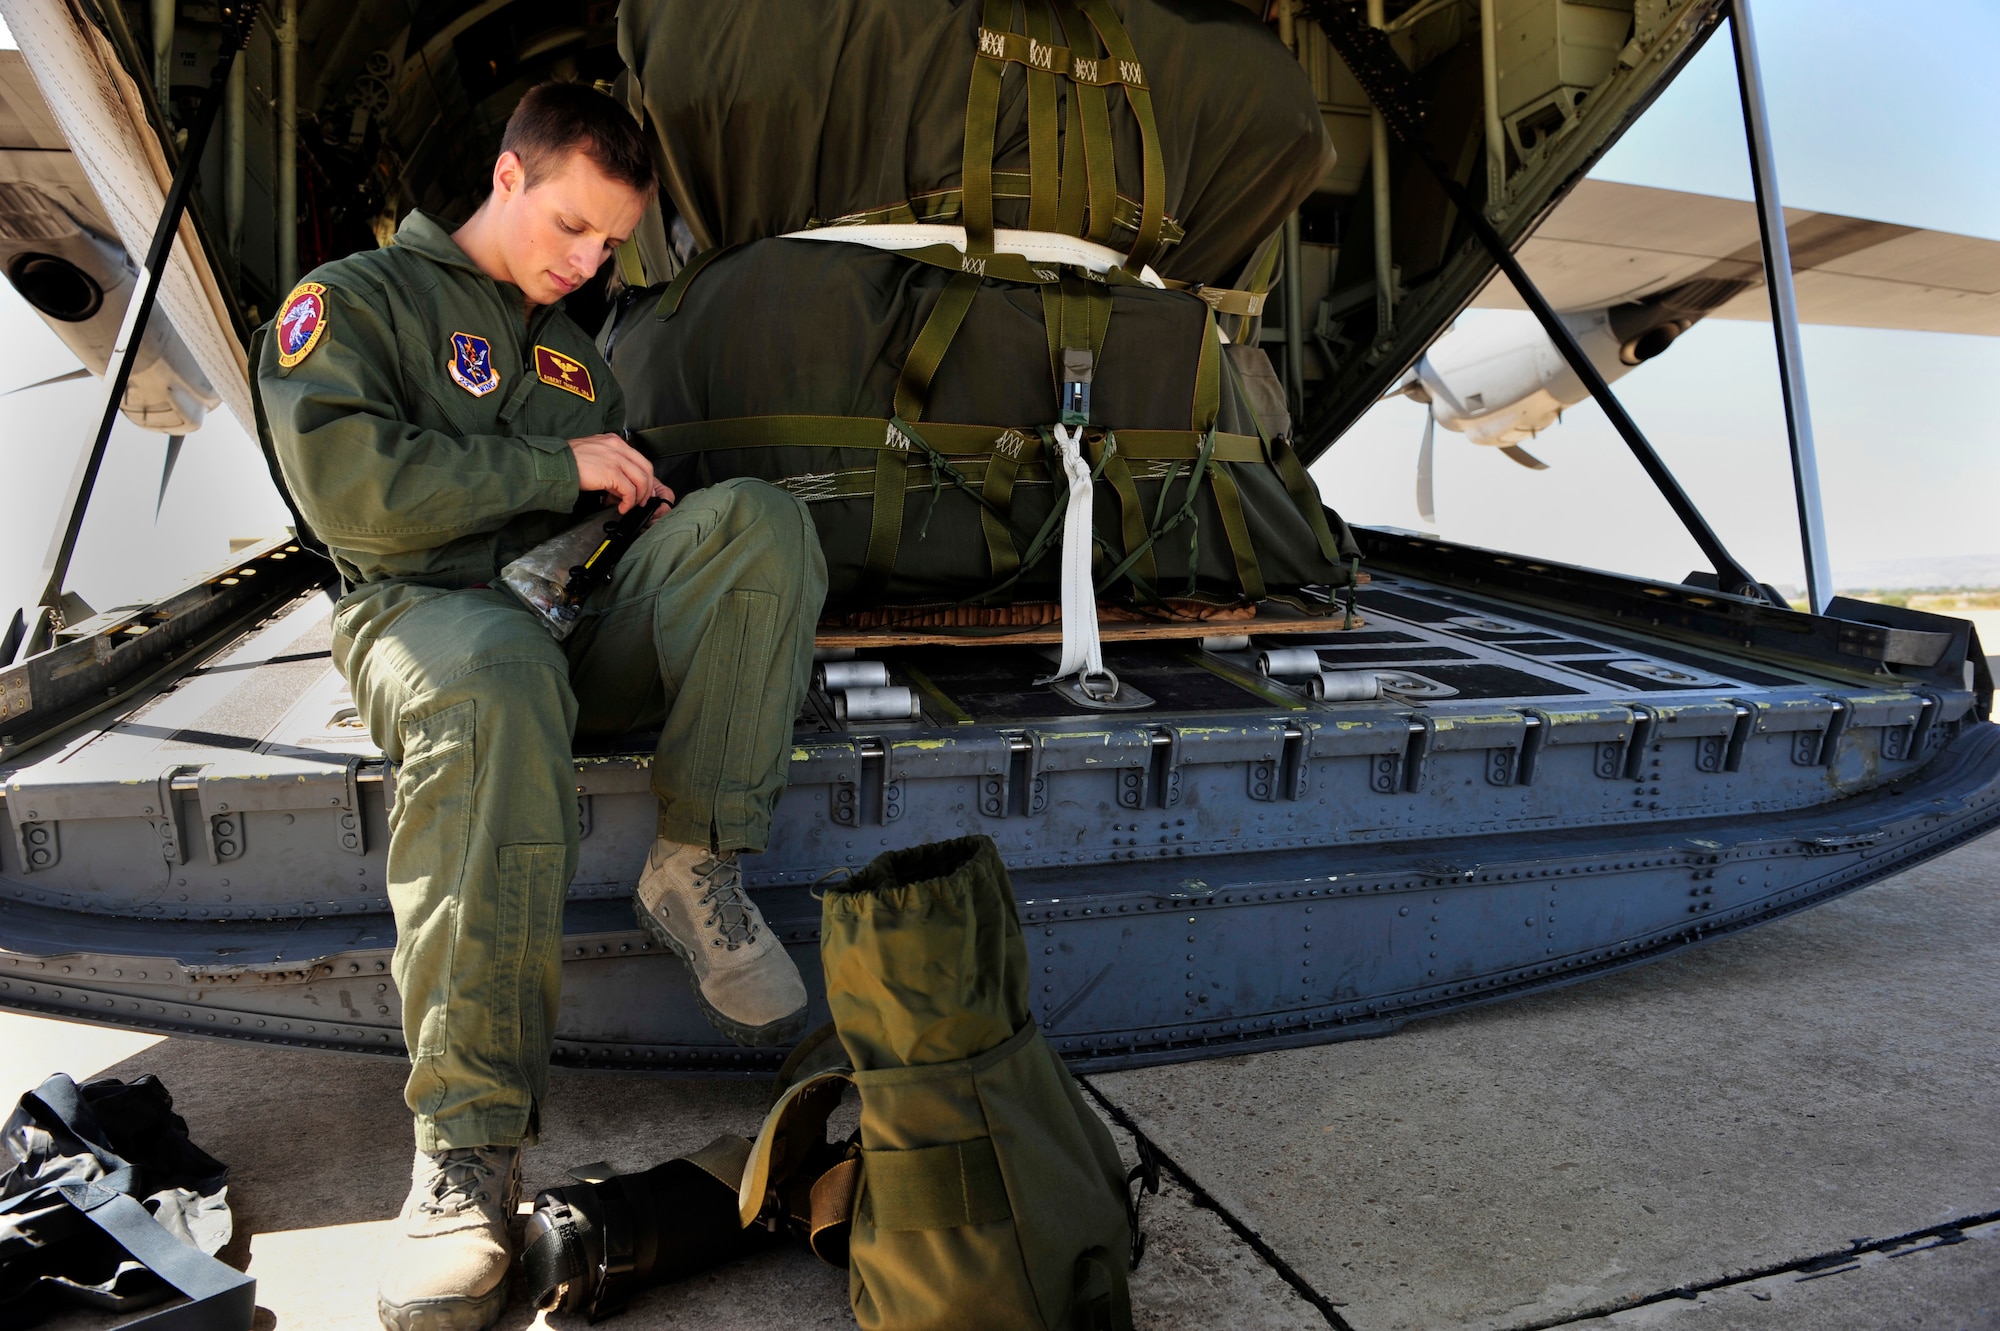 U.S. Senior Airman Robert Trubee, 48th Rescue Squadron para-jumper, checks his rescue kit prior to the space shuttle launch, July 8, 2011, Zaragoza Air Base, Spain.  As space shuttle Atlantis makes it's final launch into orbit, personnel from DoD, NASA, and the Spanish Air Force work together to prepare for a possible emergency landing at the Transoceanic Abort Landing Site, Zaragoza Air Base, Spain. This particular TAL is one of three primary landing sites within U.S. Air Forces Europe, and this is the 135th mission the U.S. military has supported.(U.S. Air Force photo by Tech. Sgt. Chenzira Mallory)